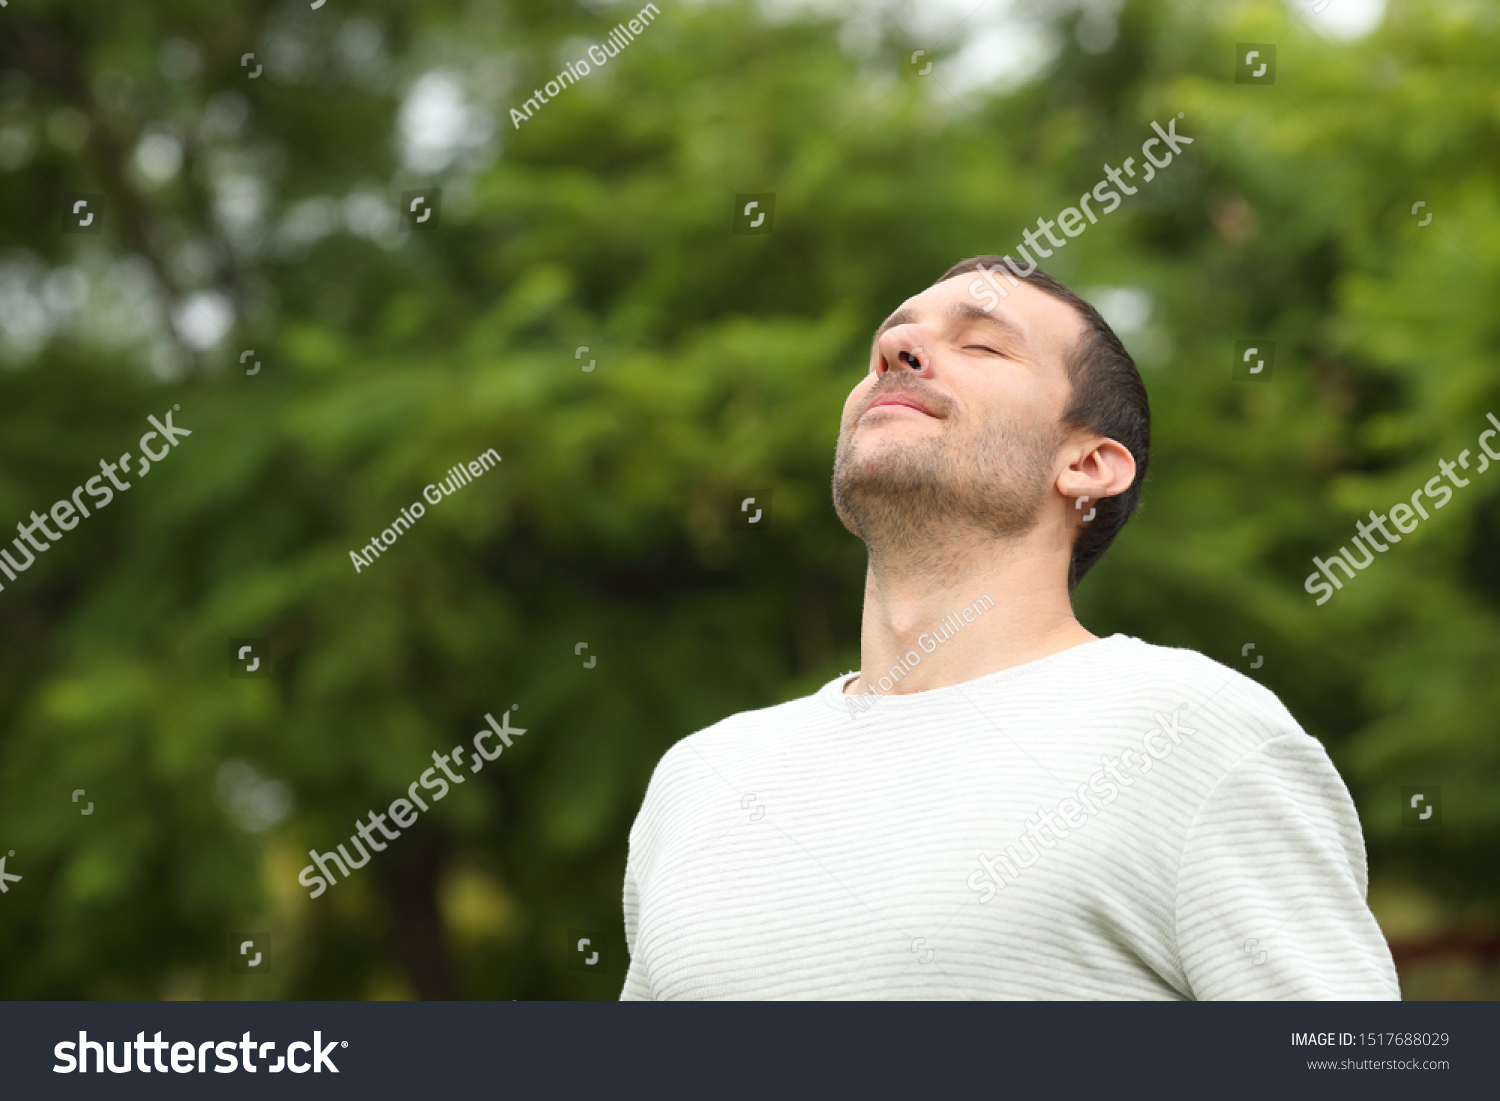 Relaxed adult man breathing fresh air in a forest with green trees in the background #1517688029